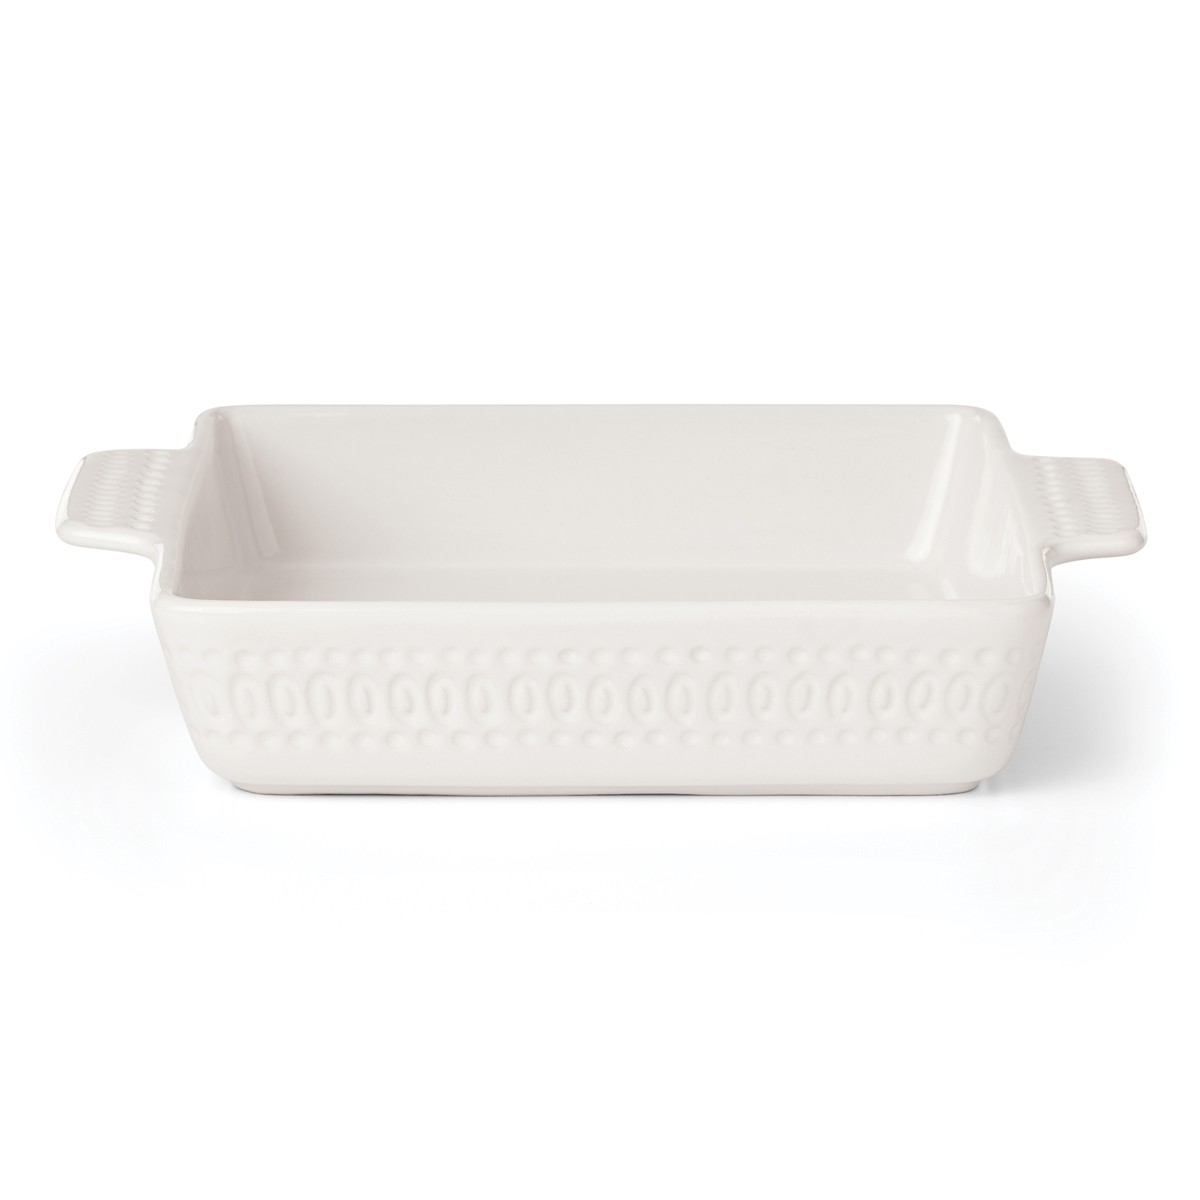 Kate Spade China by Lenox, Stoneware Willow Drive Cream Square Baker